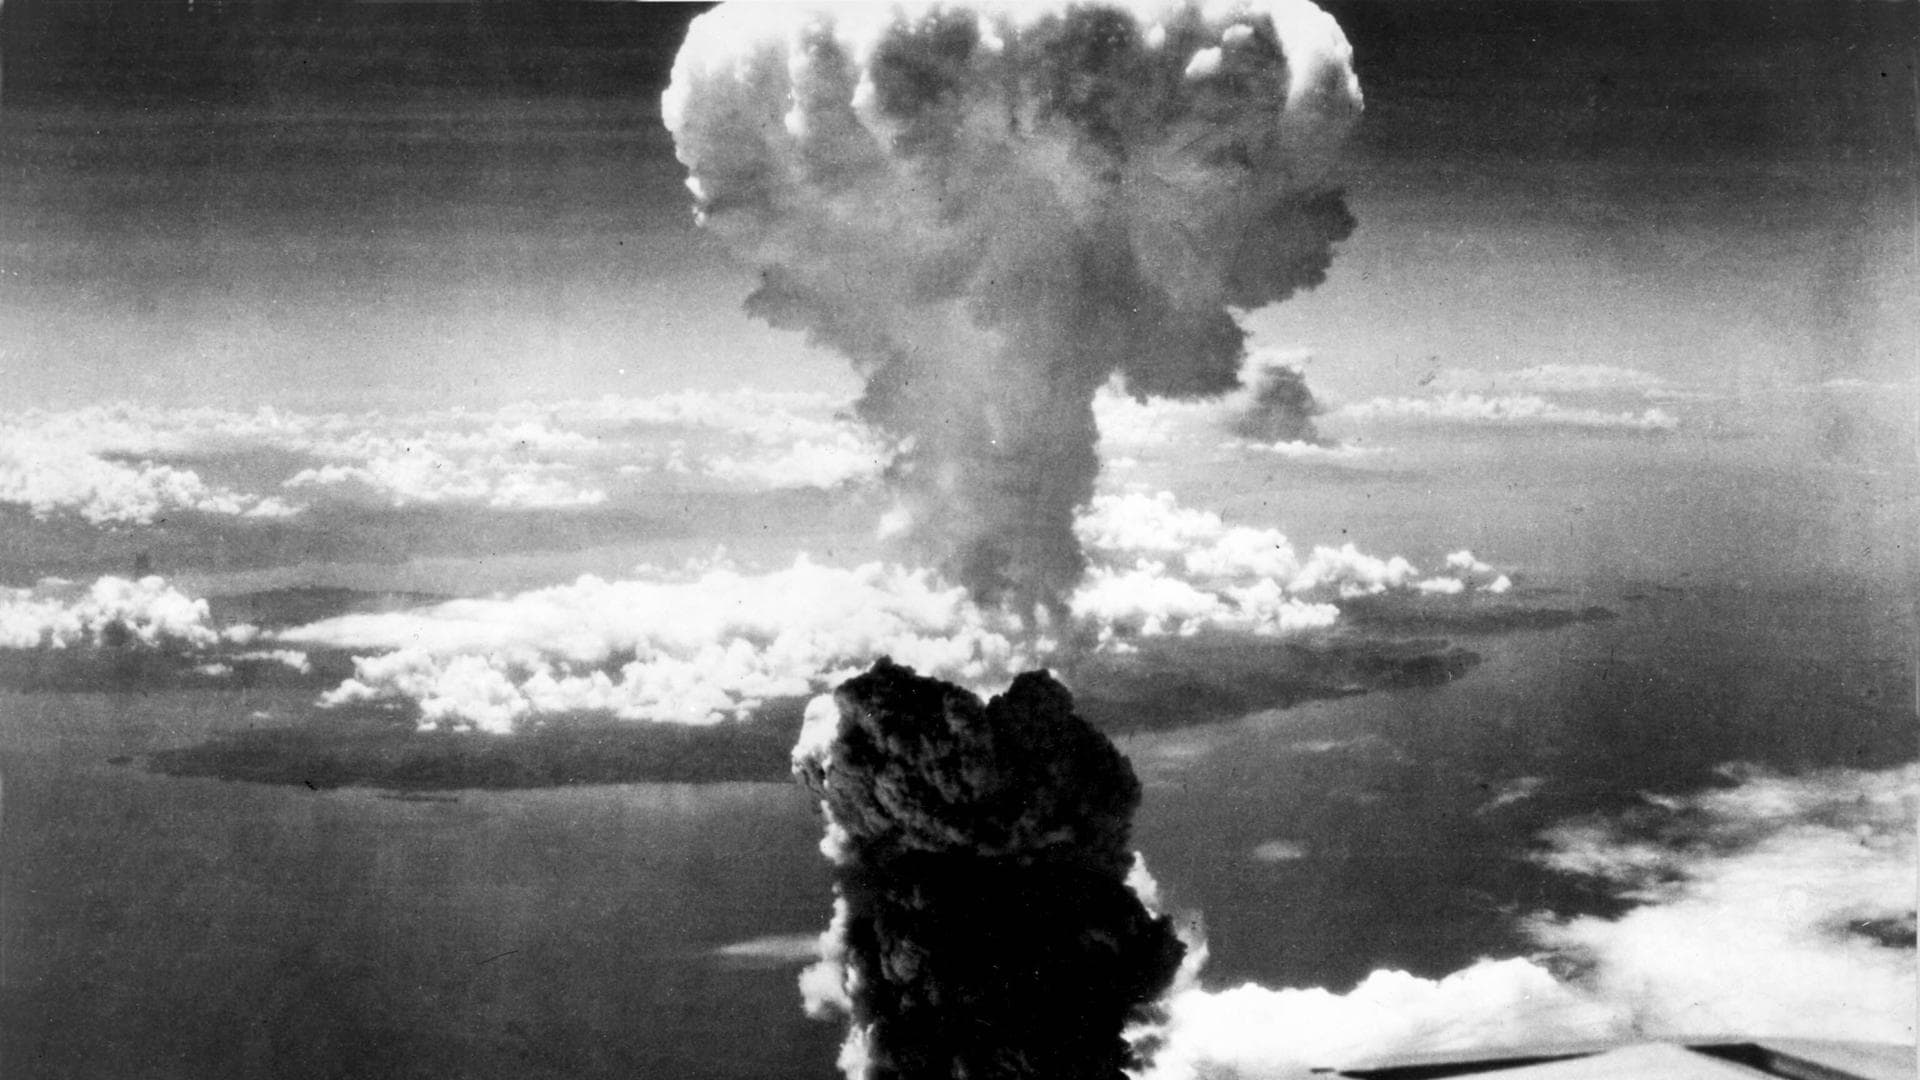 The ethical dilemma of the atomic bomb scientists: "Now we are all children of ..."